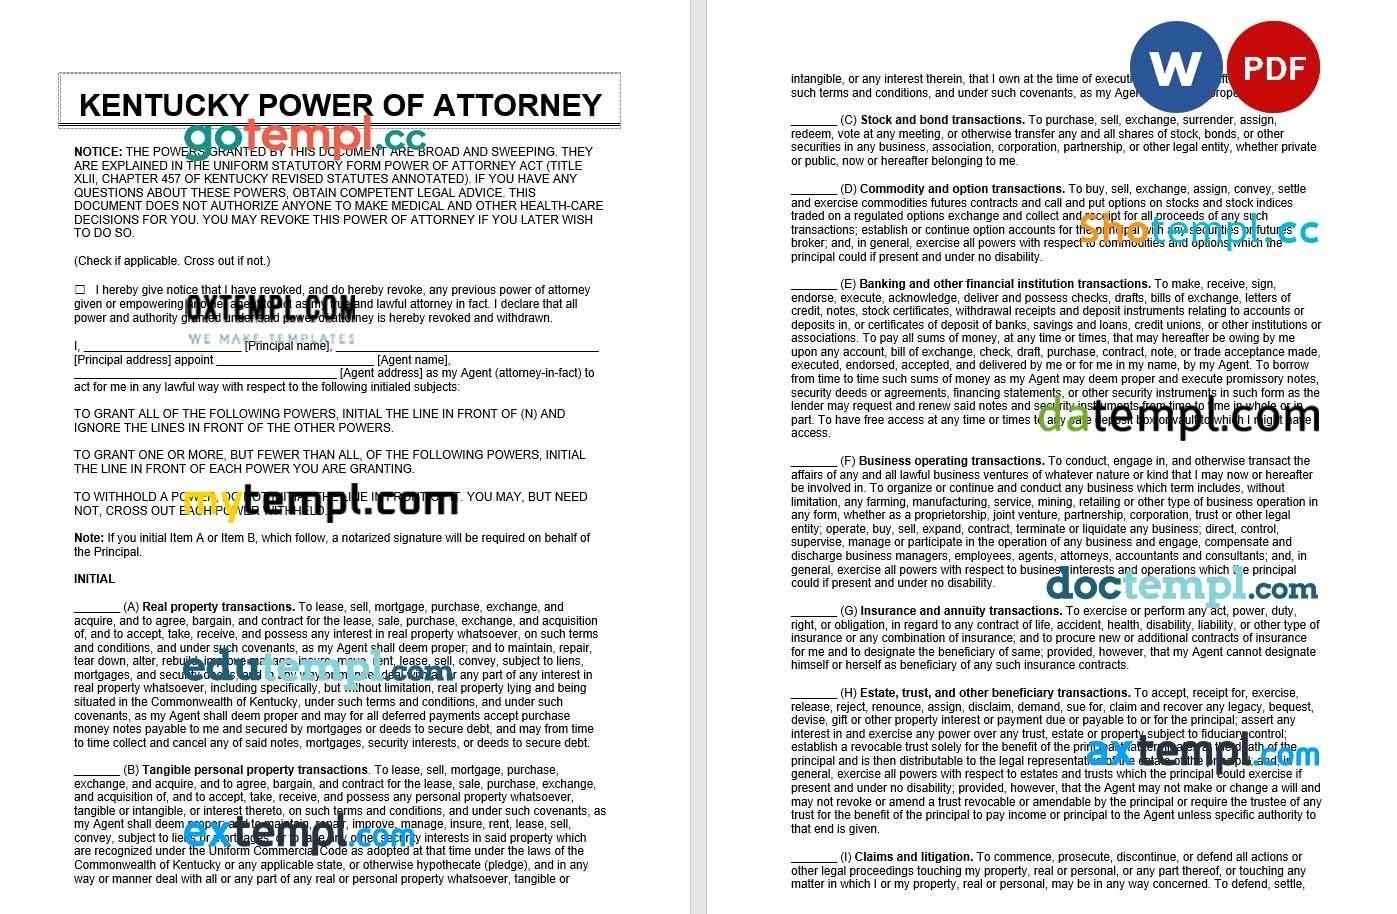 Kentucky Power of Attorney example, fully editable